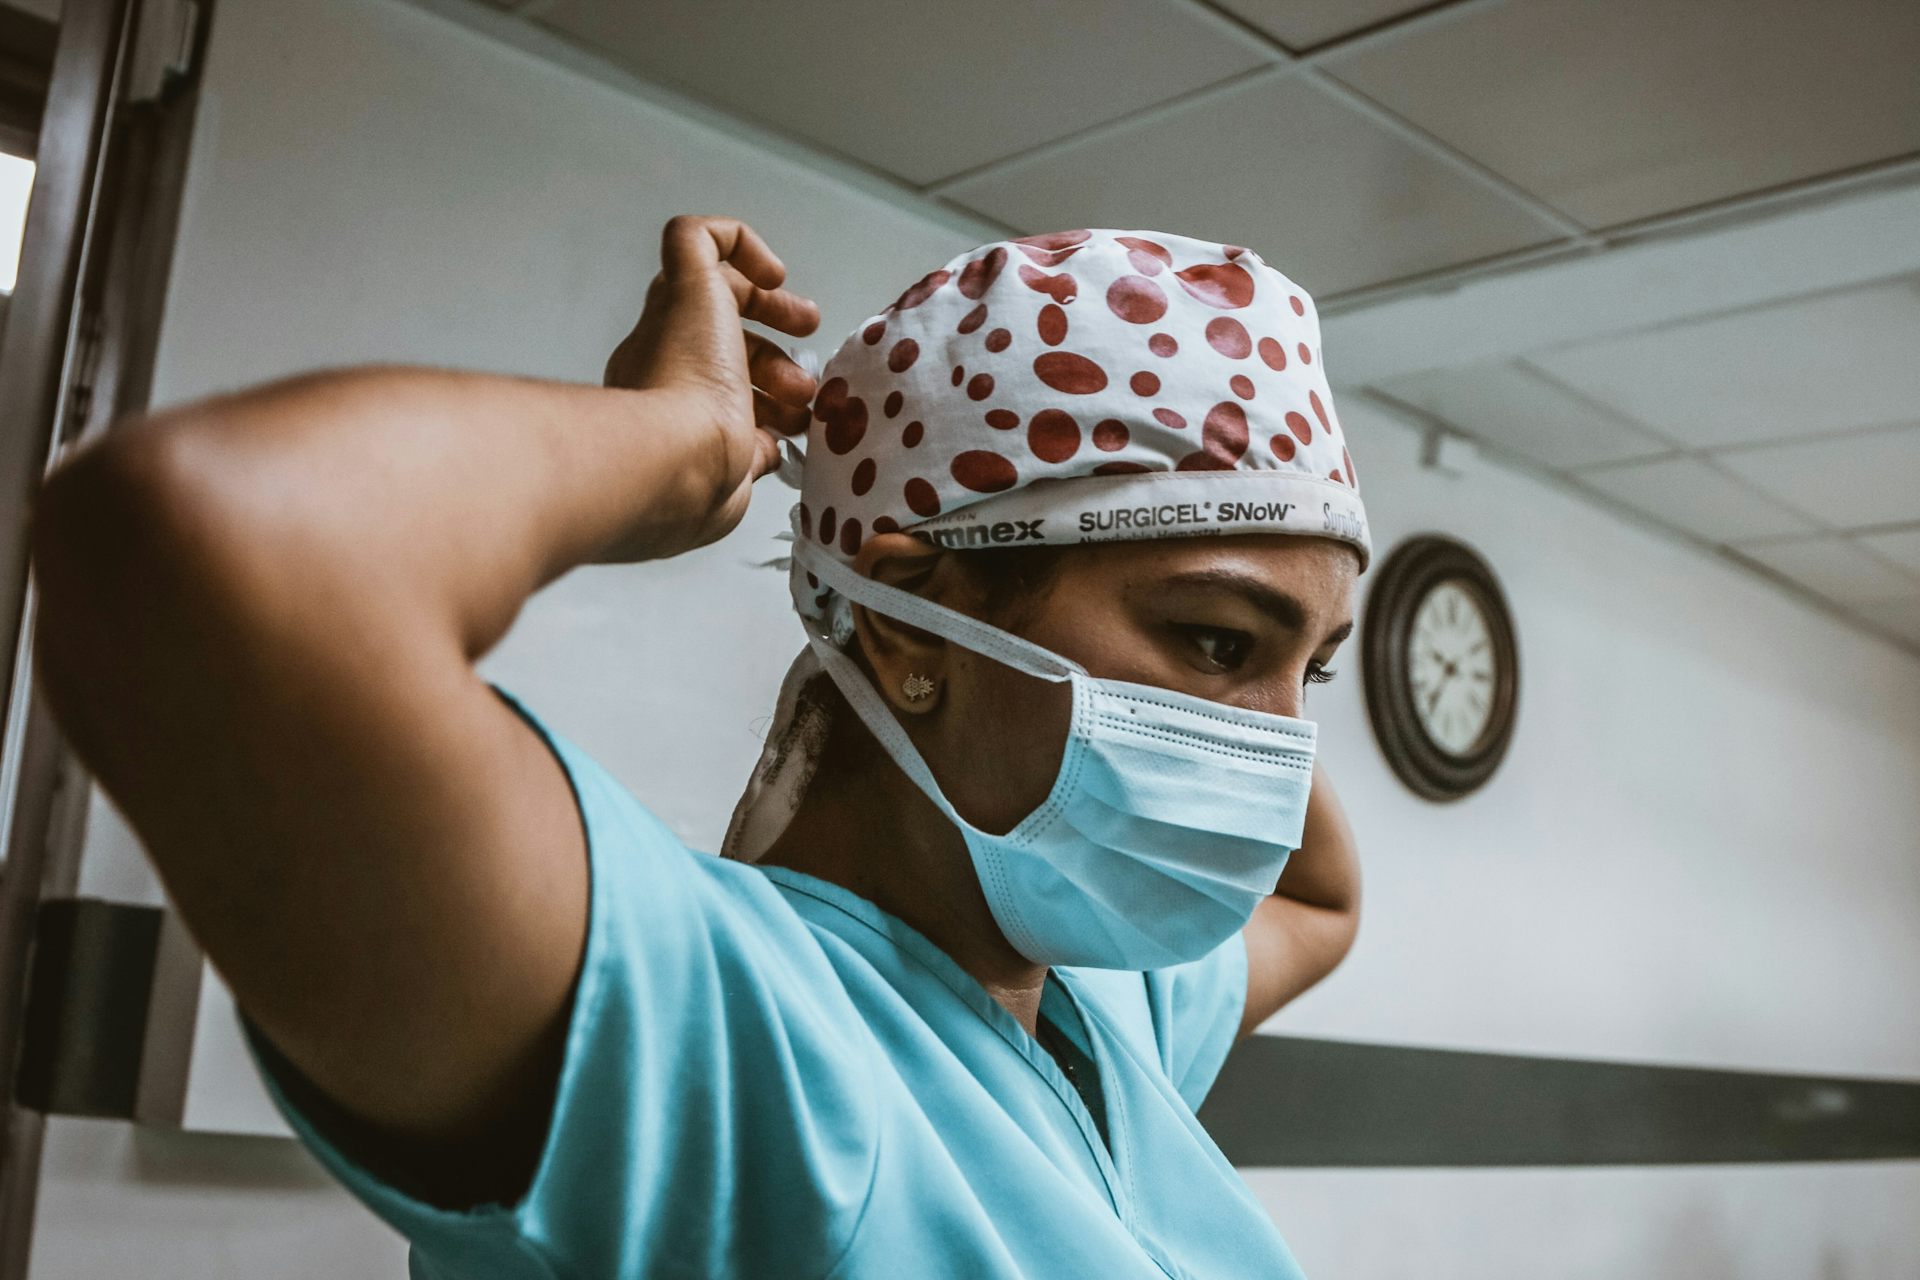 A non-white medical professional securing their mask and hair covering